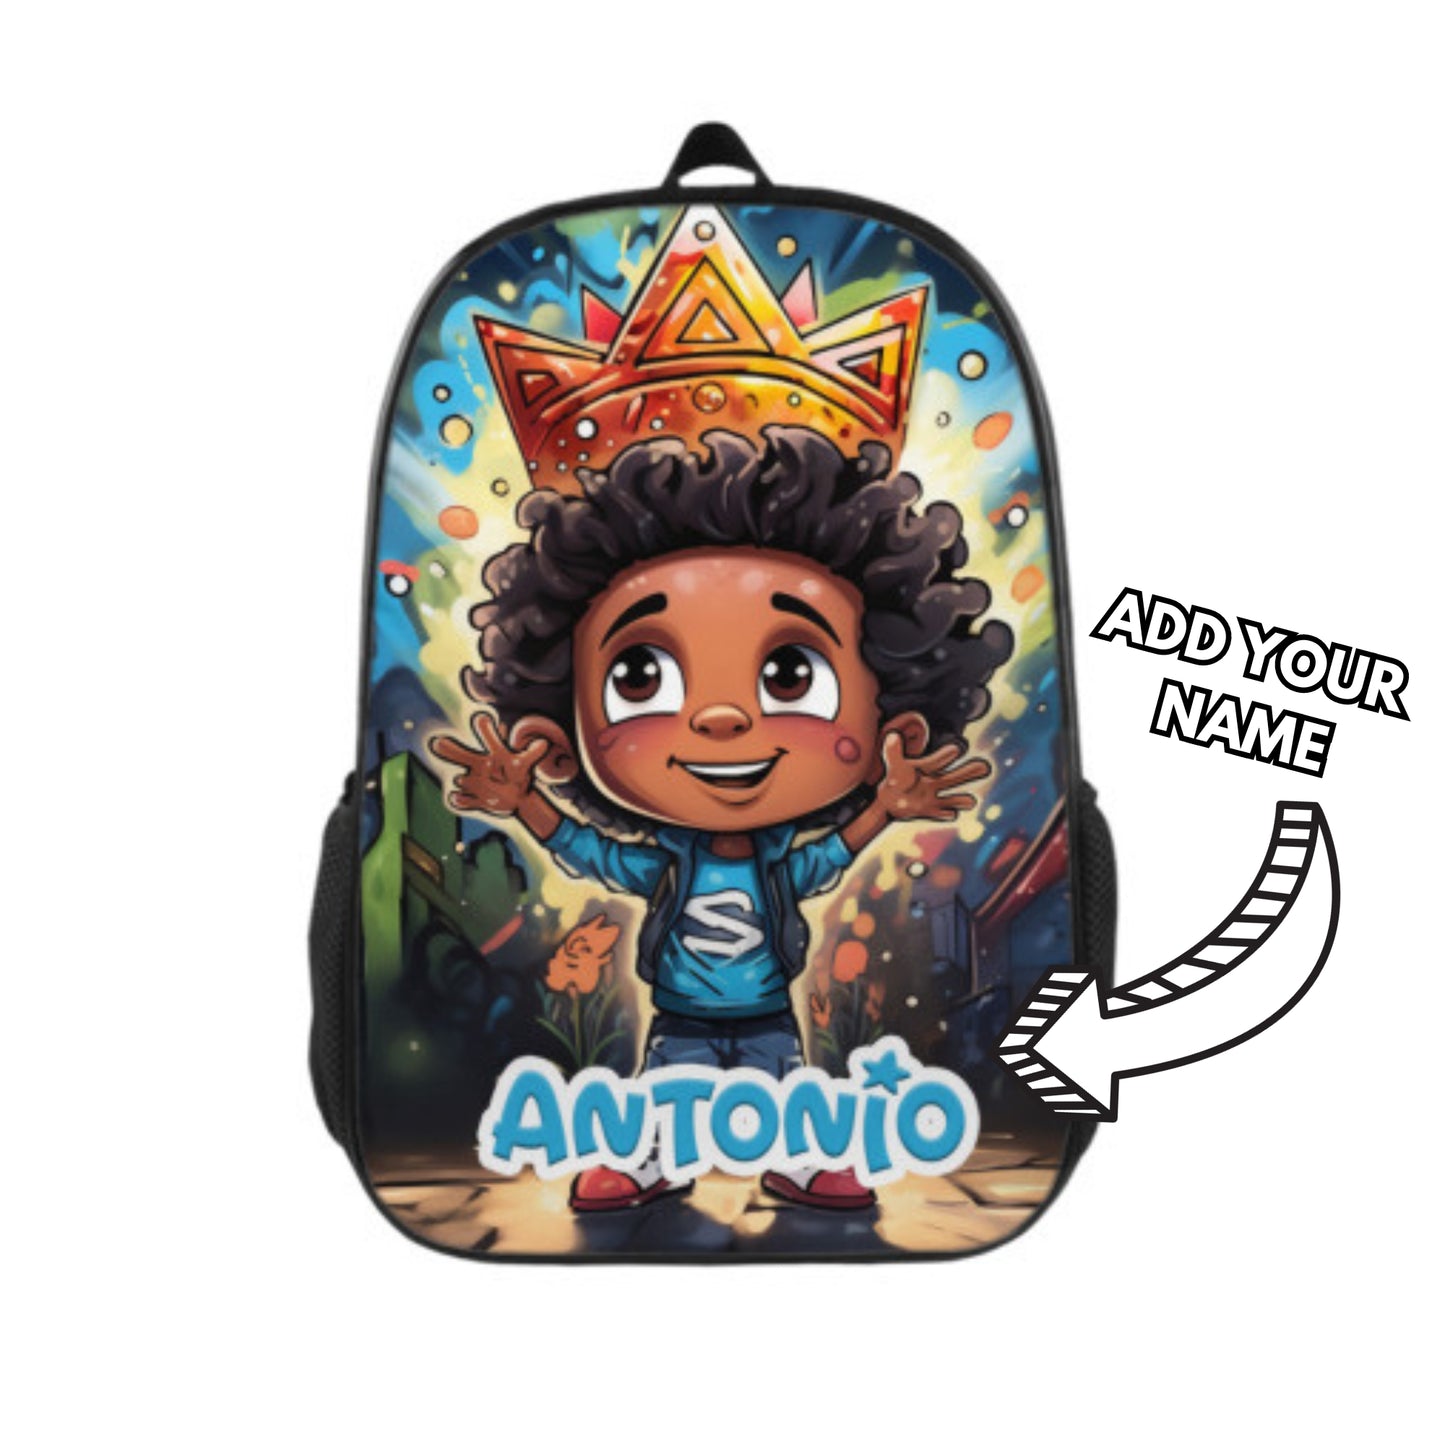 Personalised Name Backpack For Kids